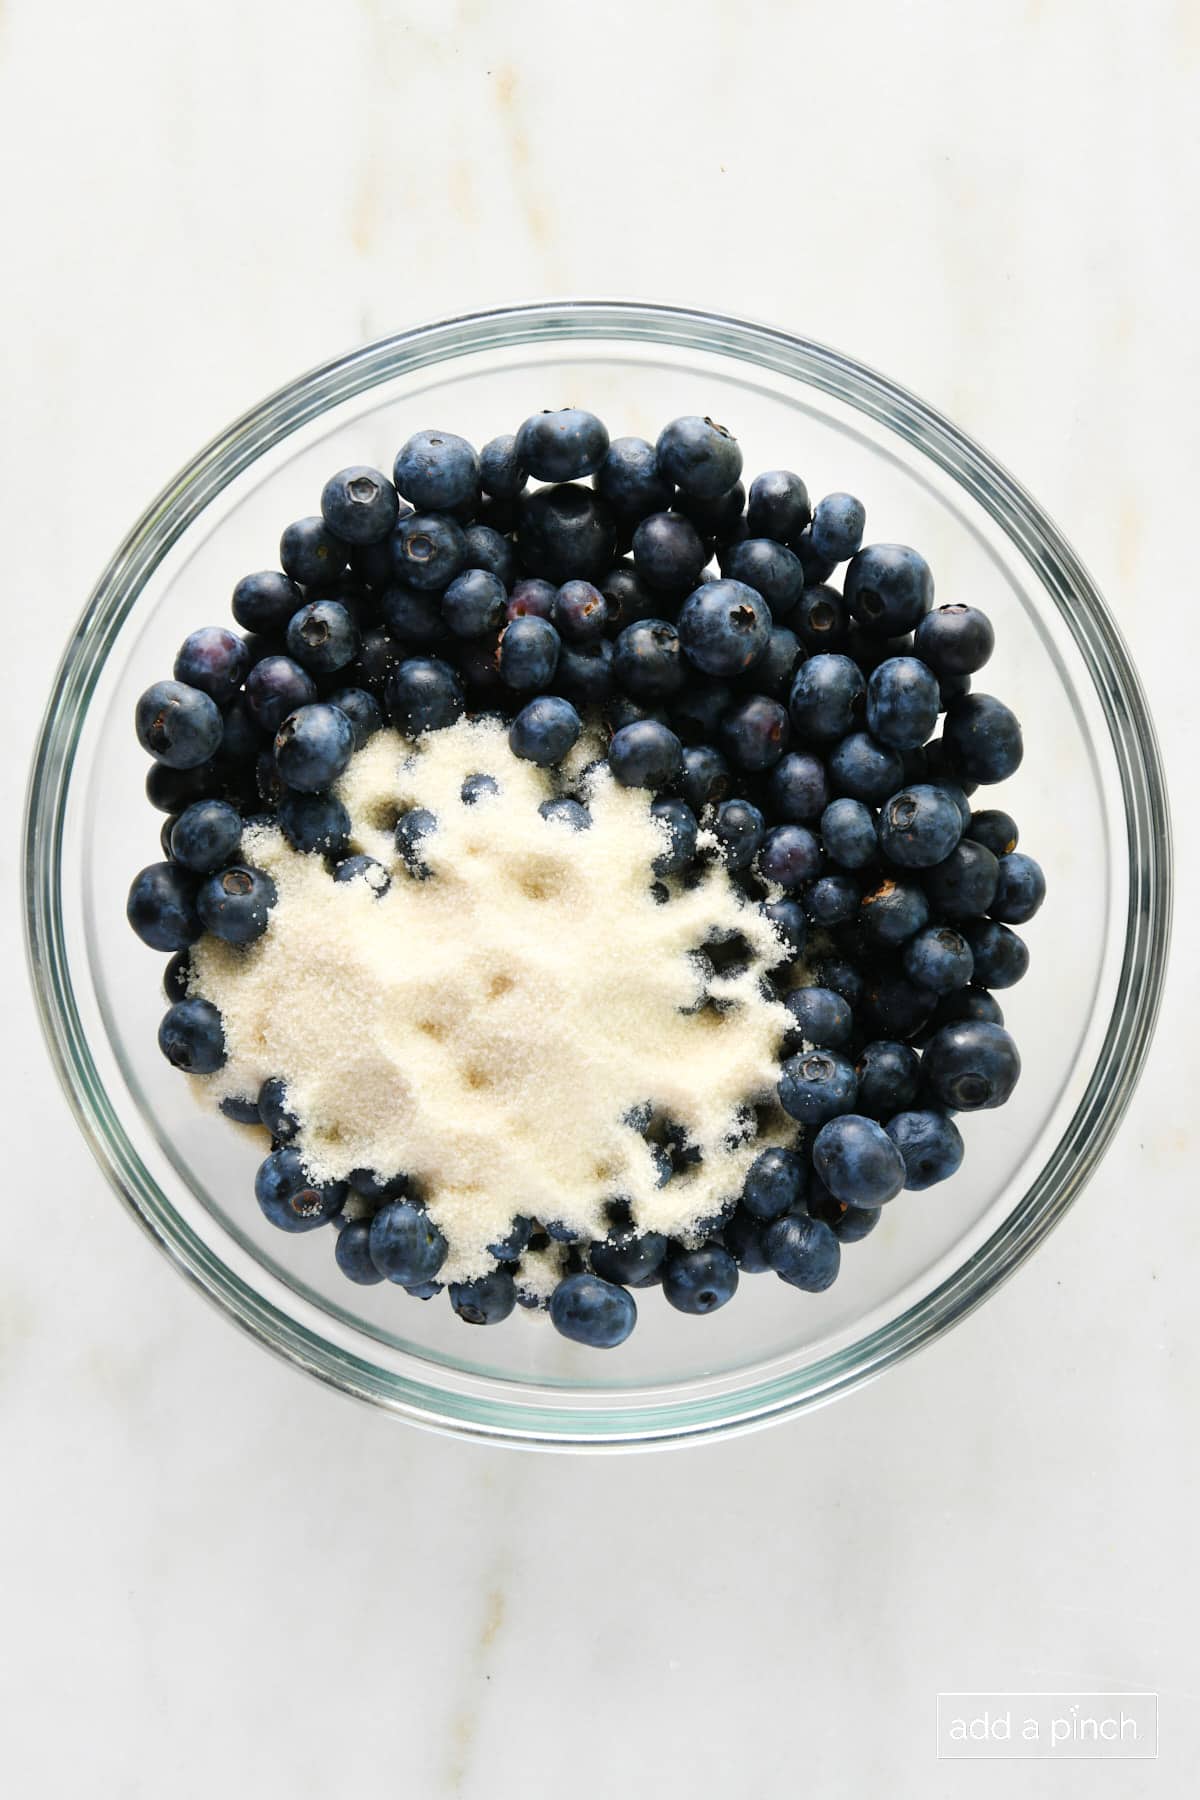 Blueberries and sugar in a glass bowl